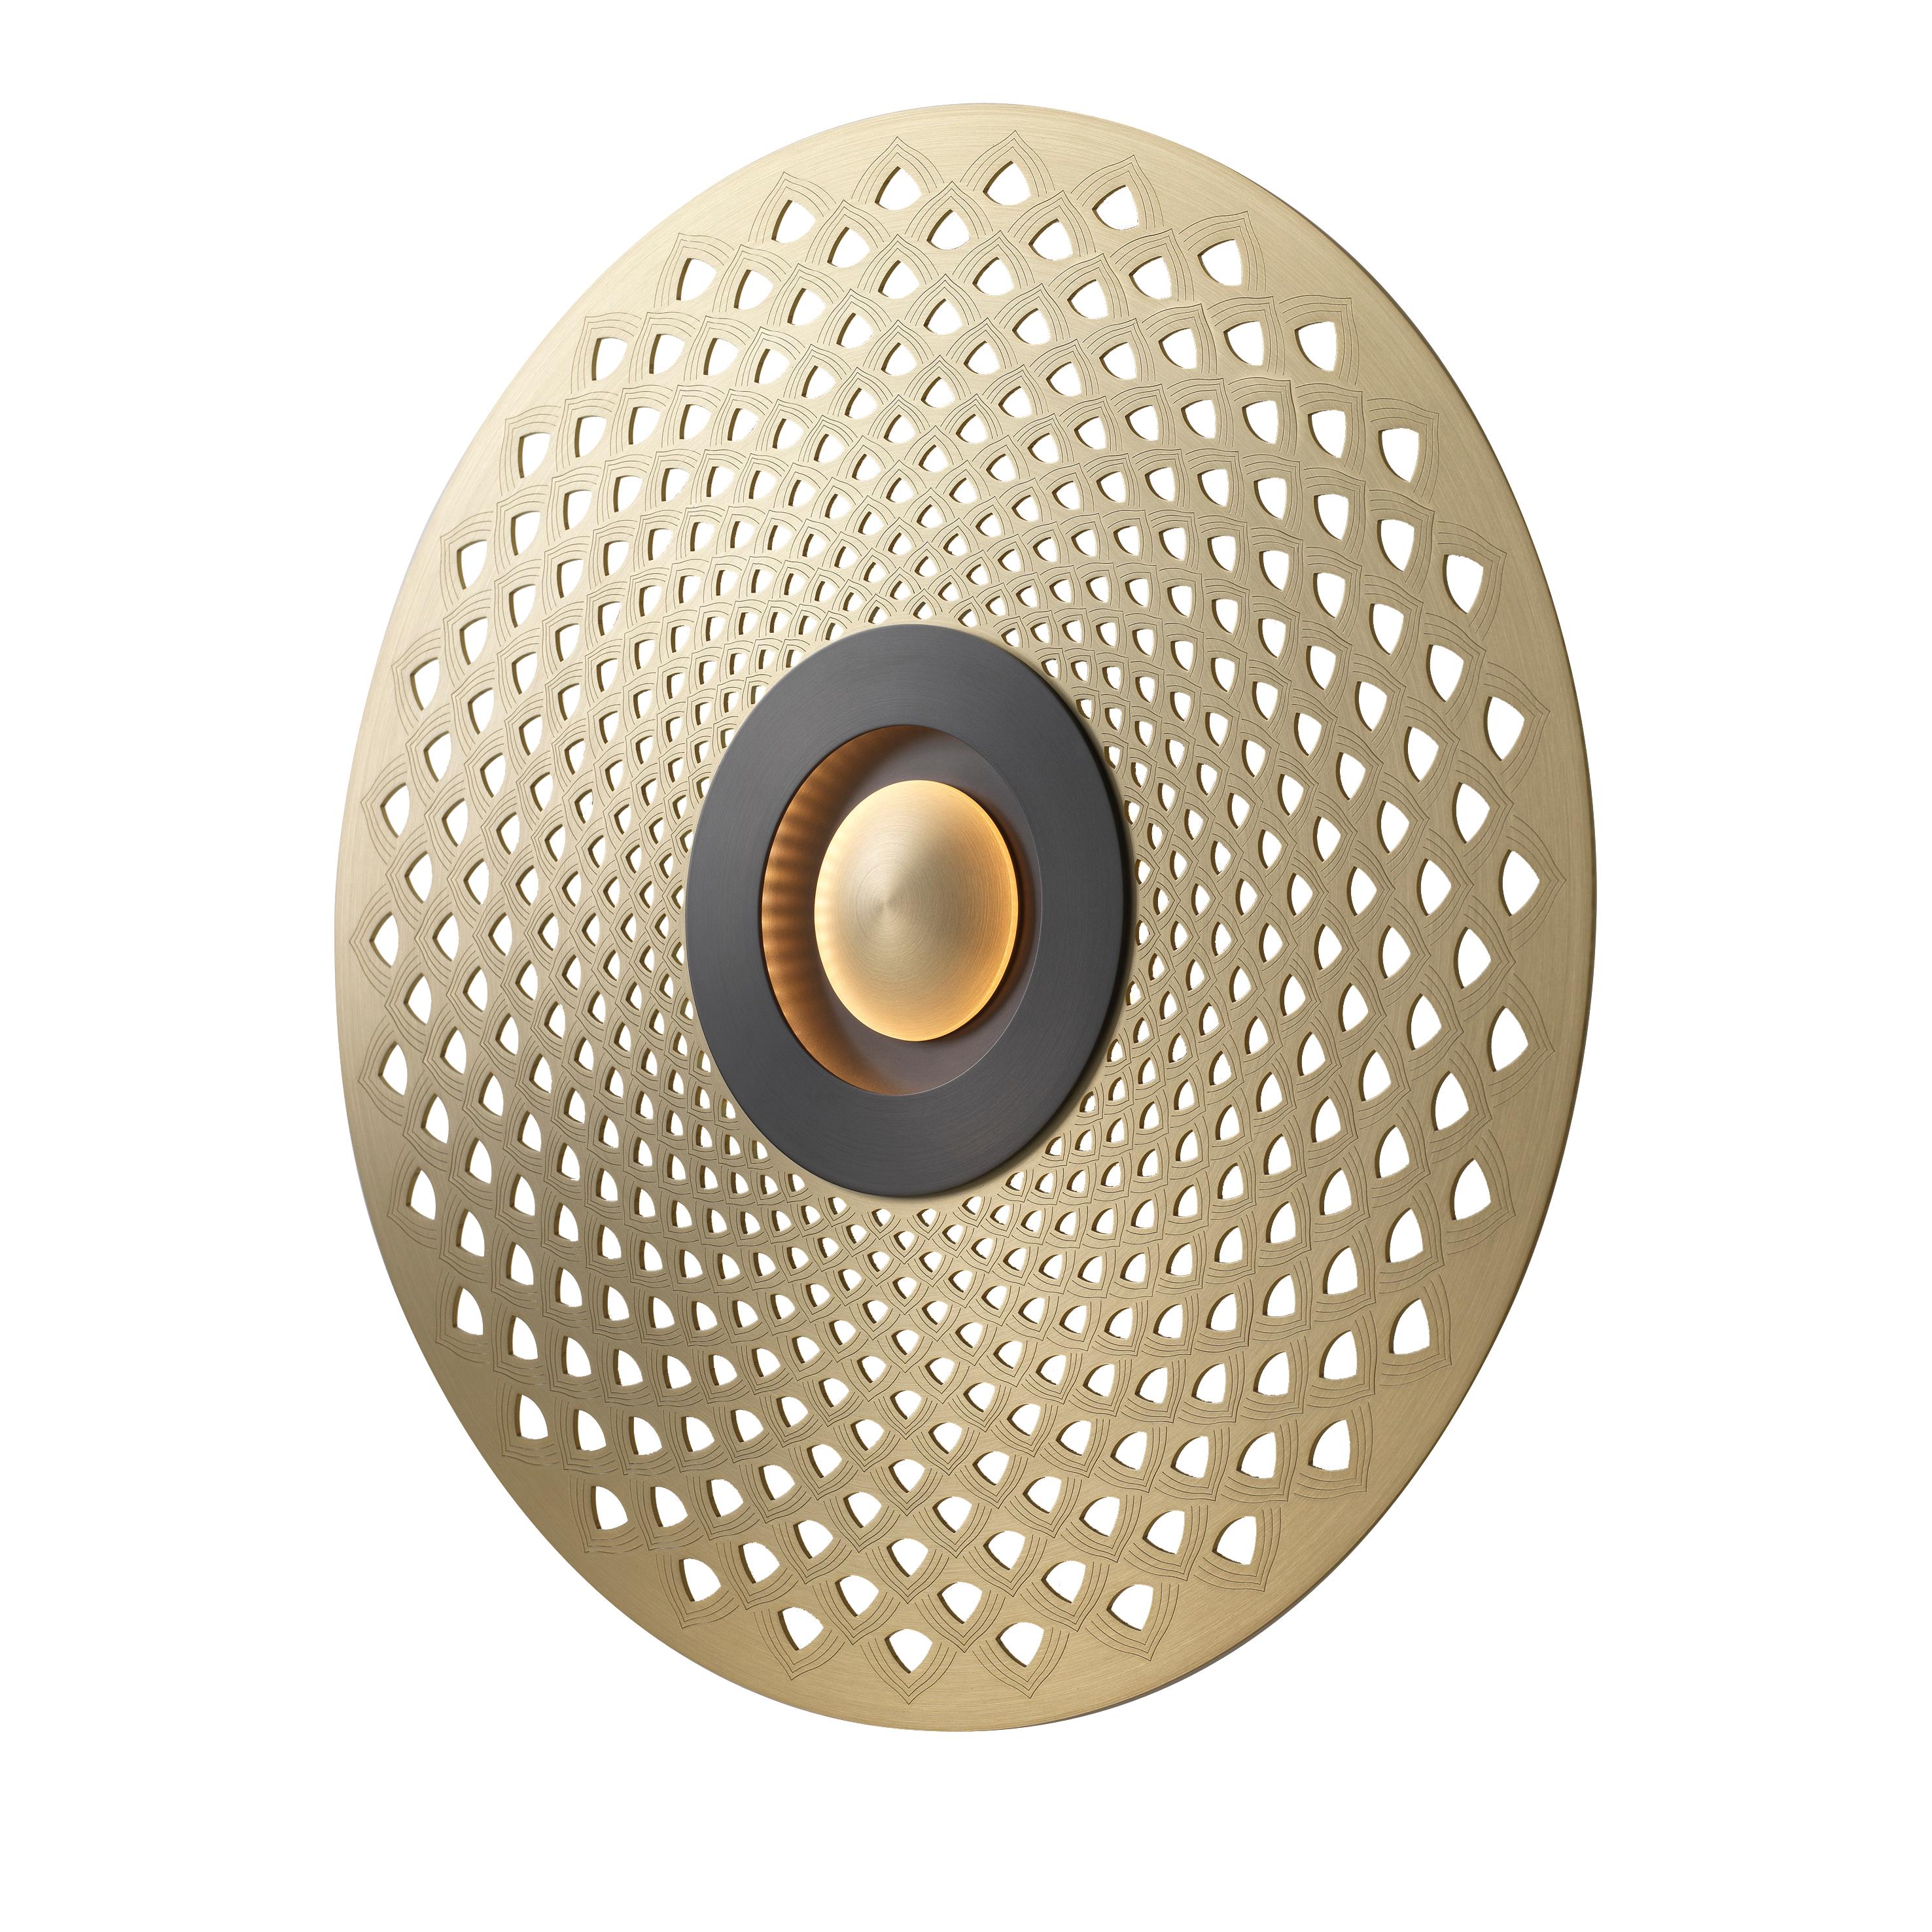 Earth Mandala wall light by Emilie Cathelineau
Dimensions: D44 X H5 cm
Materials: Solid brass,Polycarbonate diffuser.
Others finishes and dimensions are available.

All our lamps can be wired according to each country. If sold to the USA it